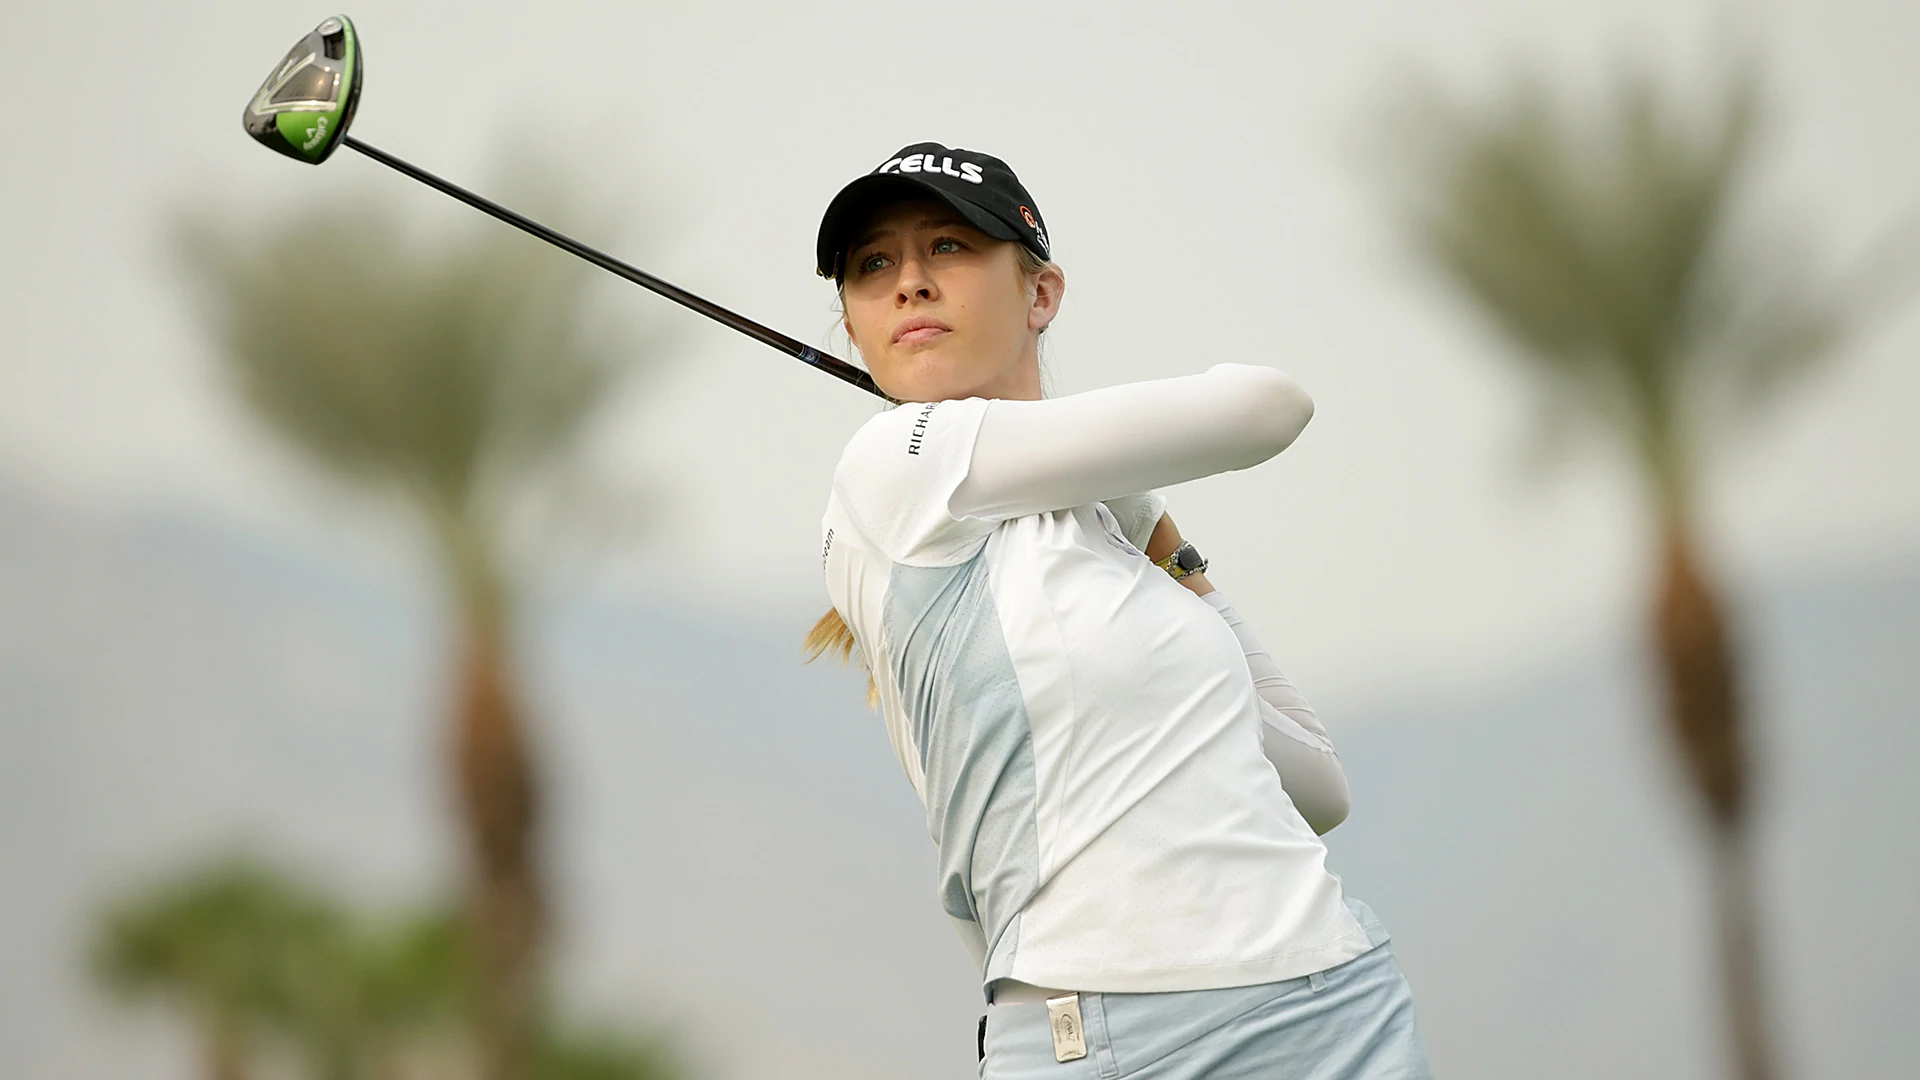 Nelly Korda (67) builds two-shot lead at ANA Inspiration